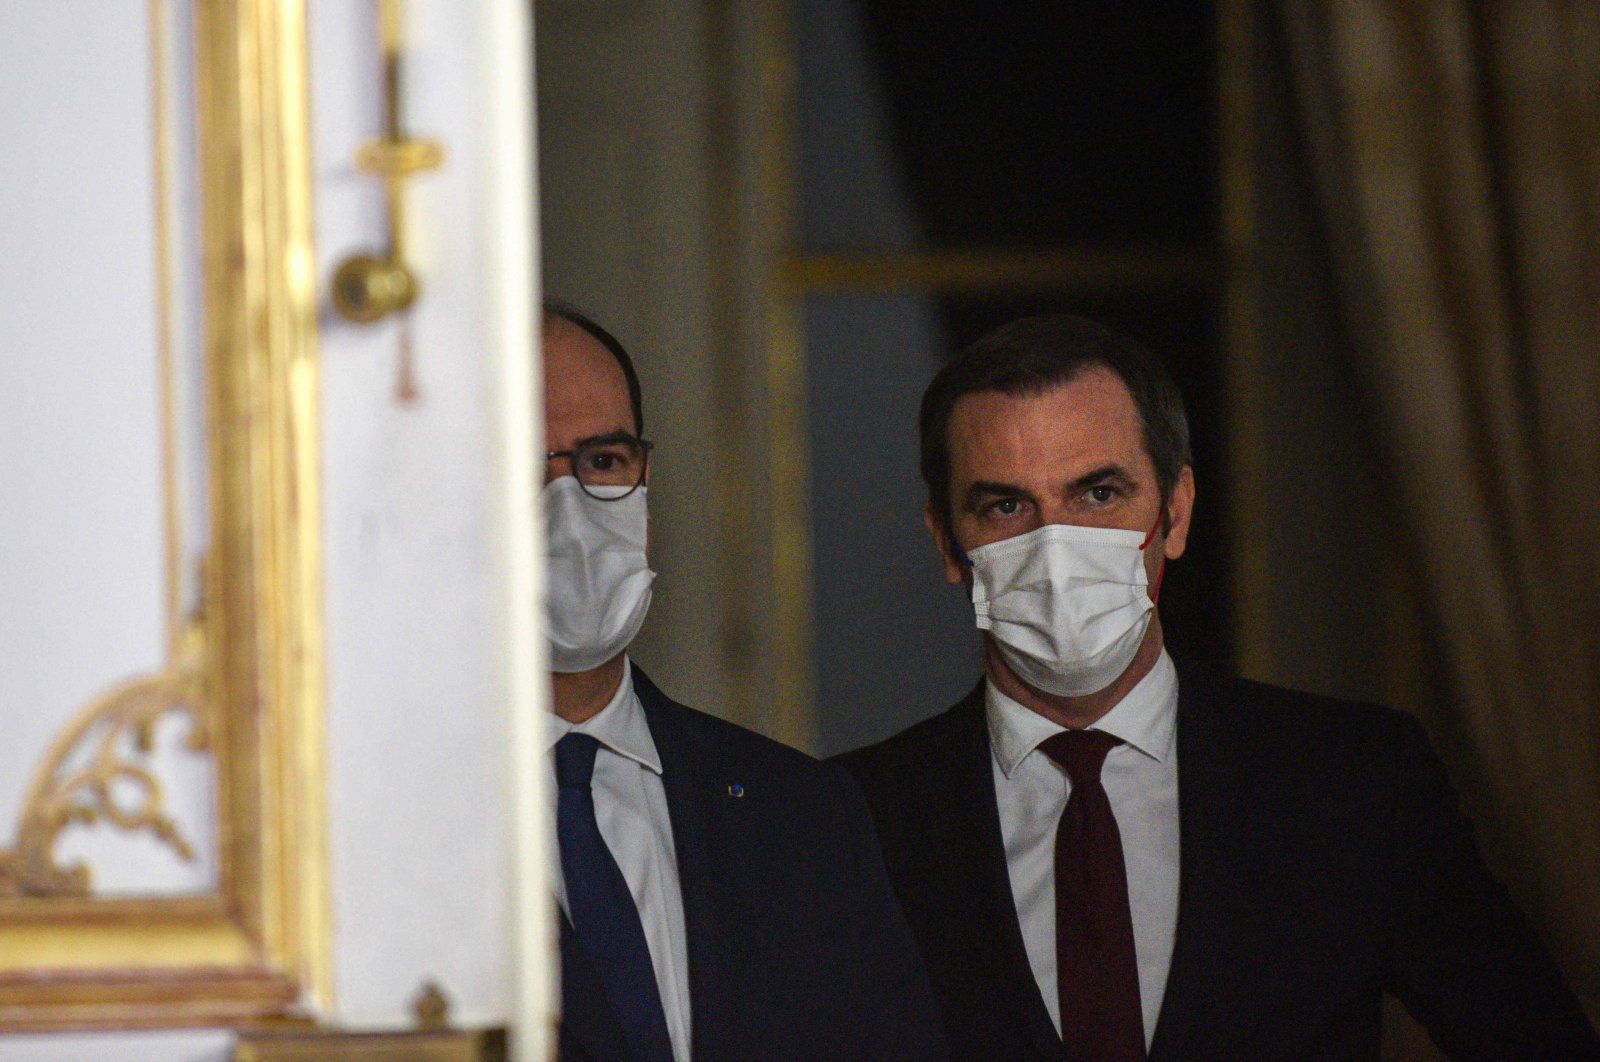 France&#039;s Prime Minister Jean Castex (L) and France&#039;s Health Minister Olivier Veran (R) arrive to give a press conference on the COVID-19 ongoing situation, in Paris, Jan. 20, 2022 (AFP Photo)